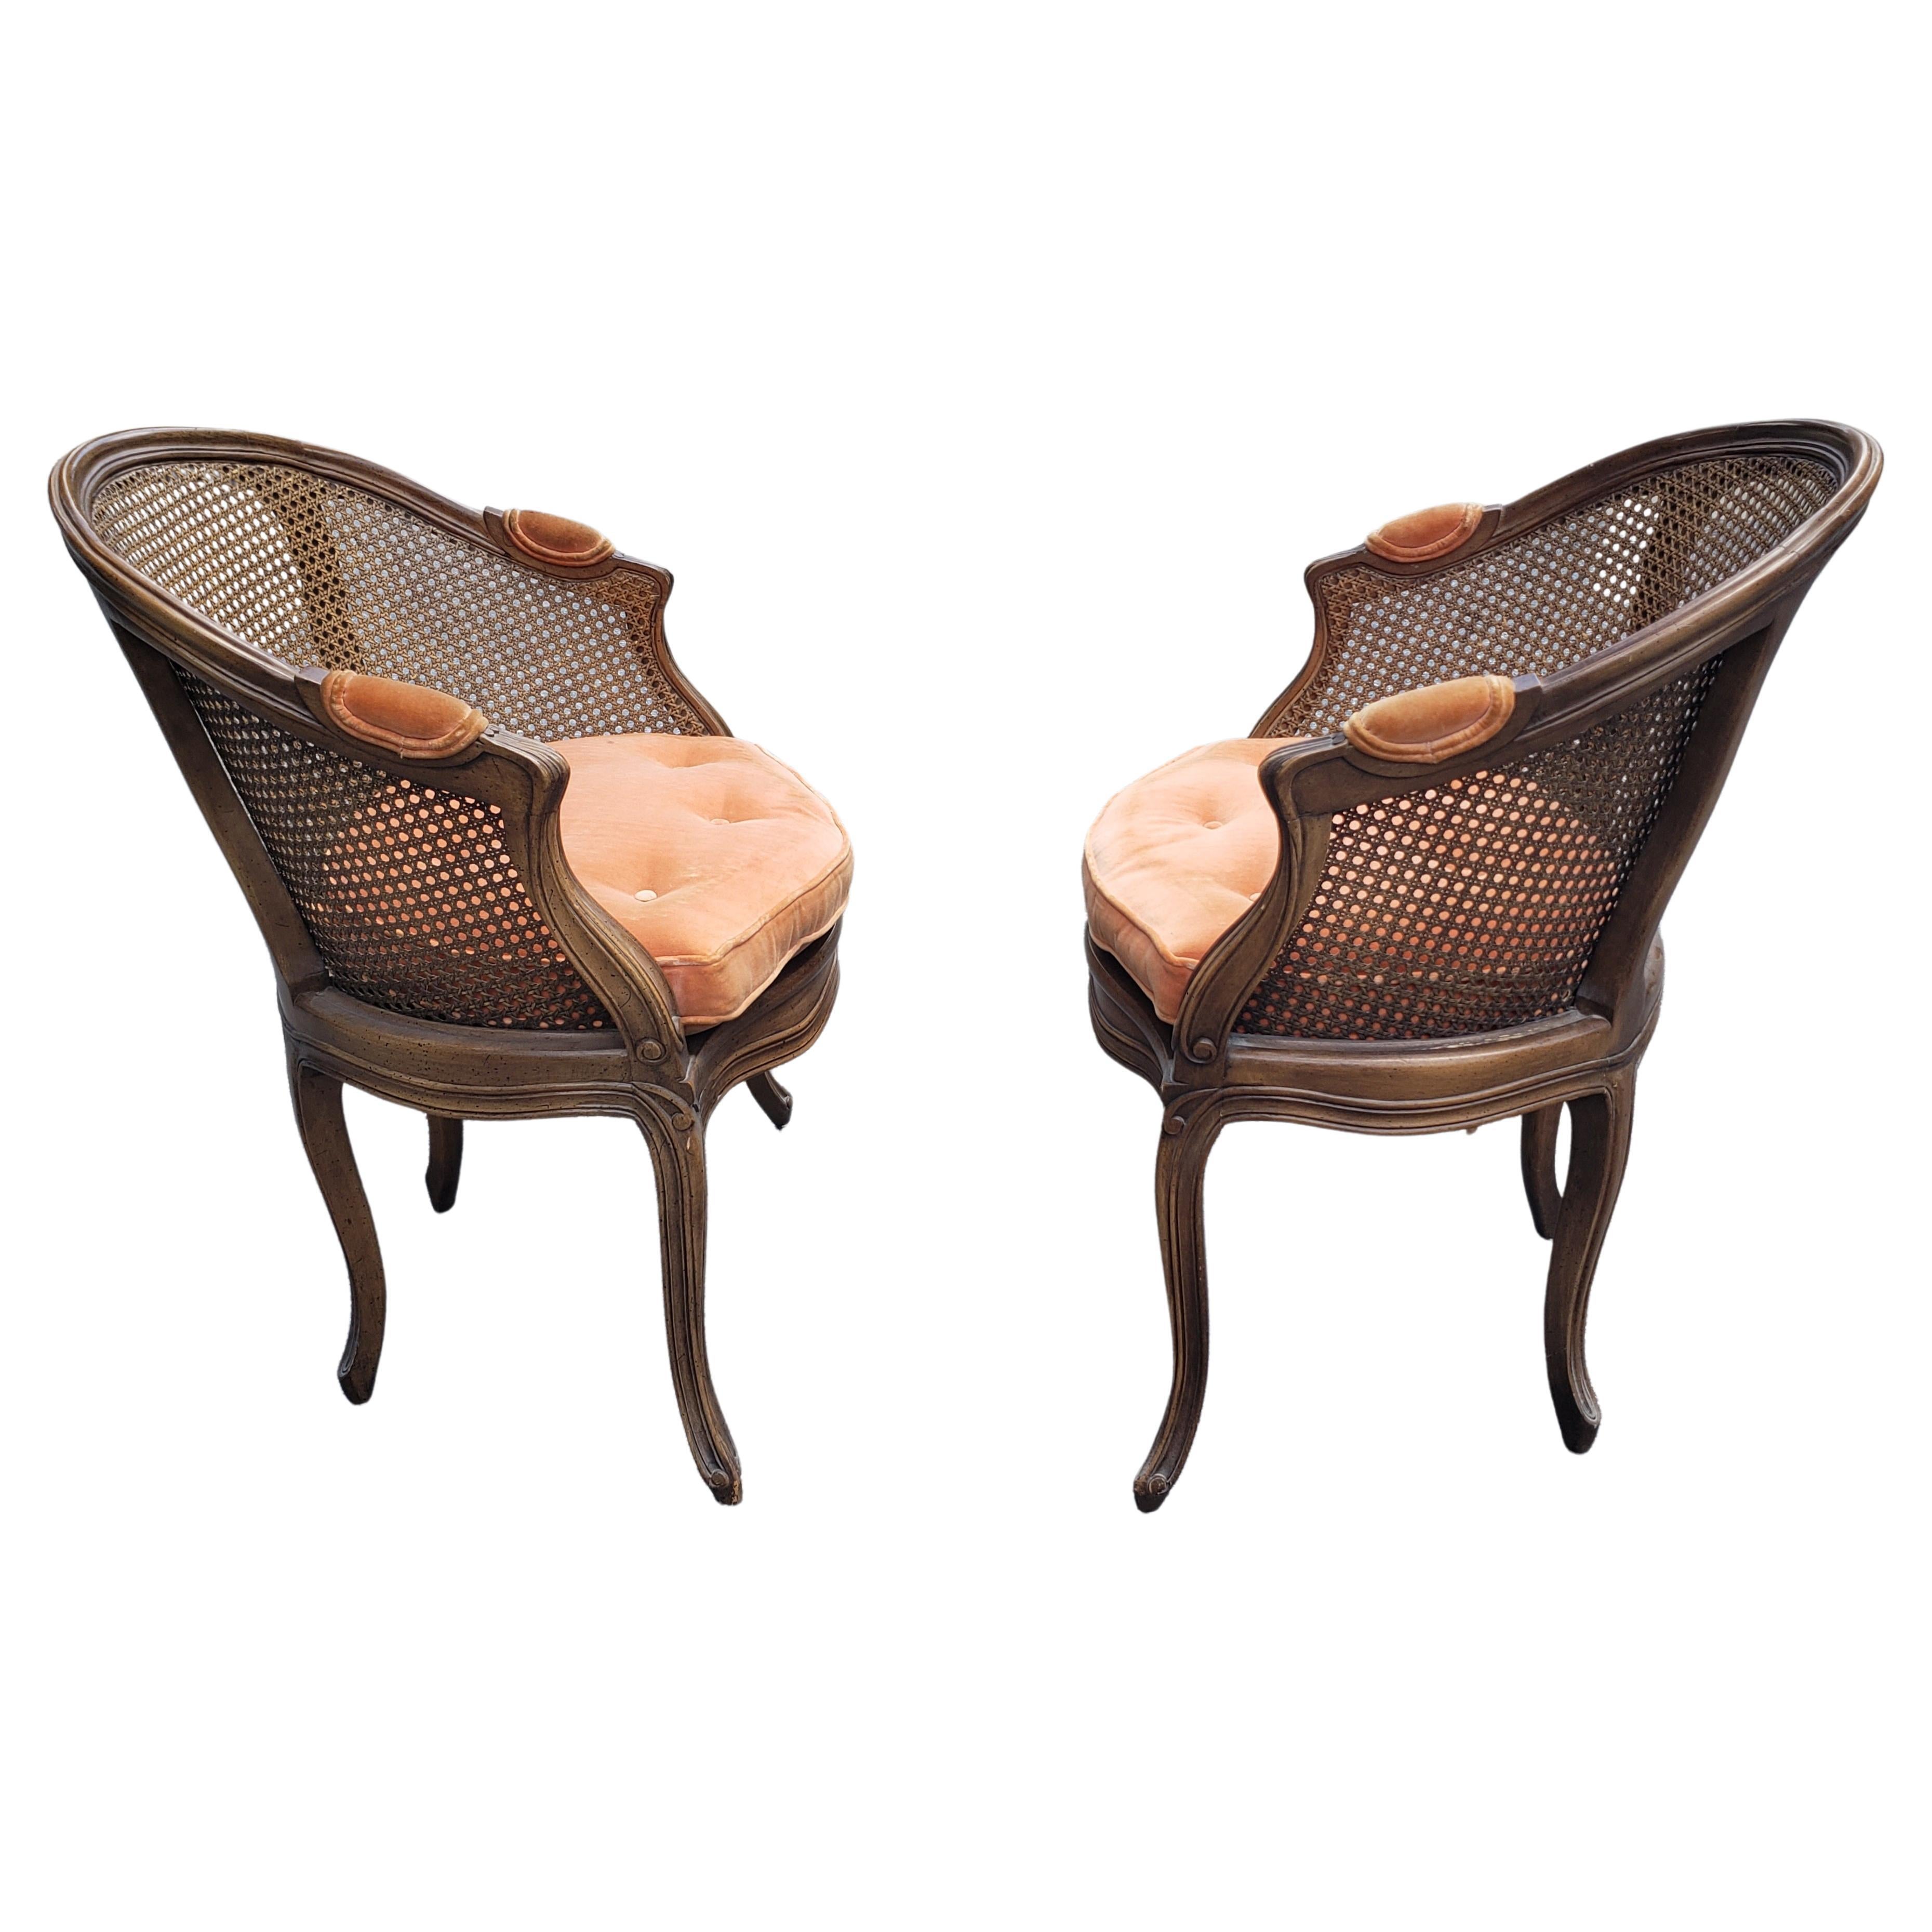 Caning French Country Walnut and Cane Tufted Upholstered Seat Chairs, a Pair